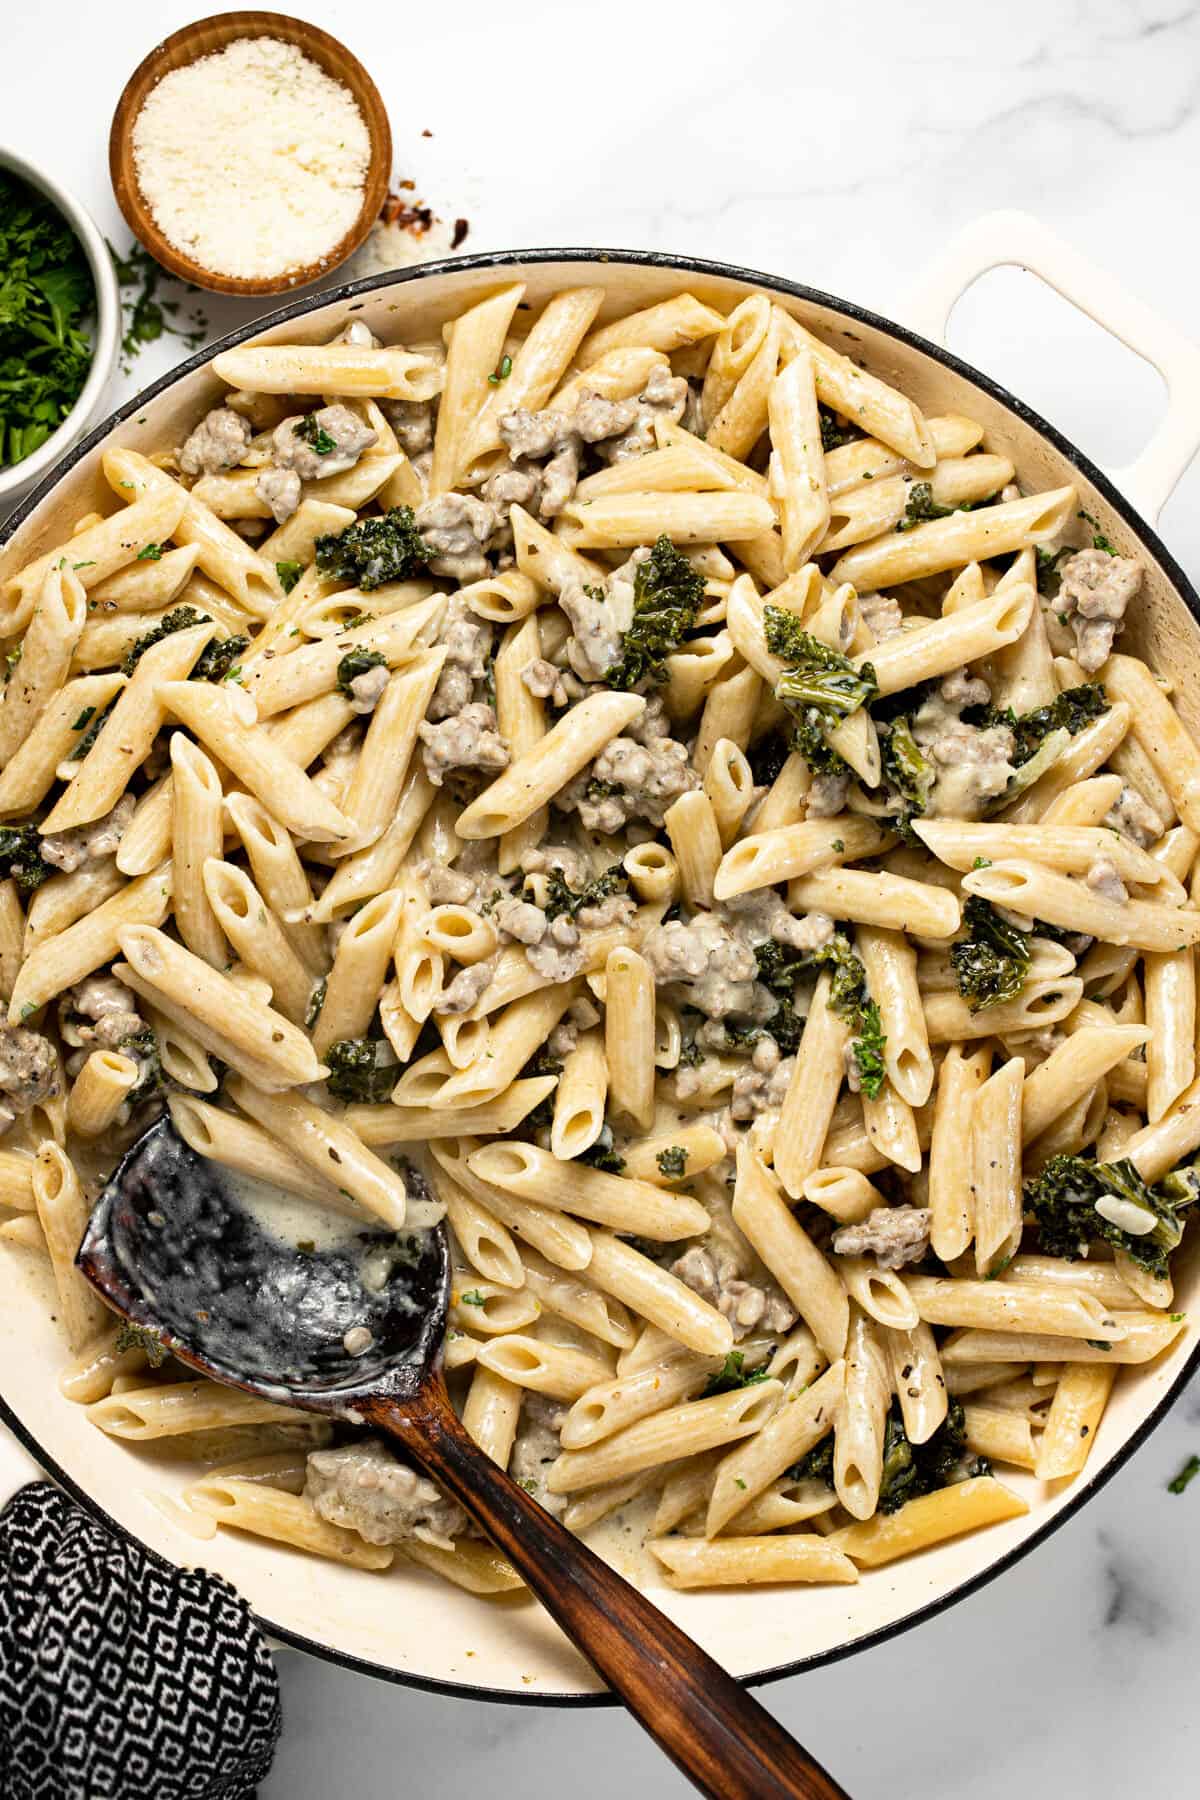 Large white pan filled with Italian sausage and kale pasta